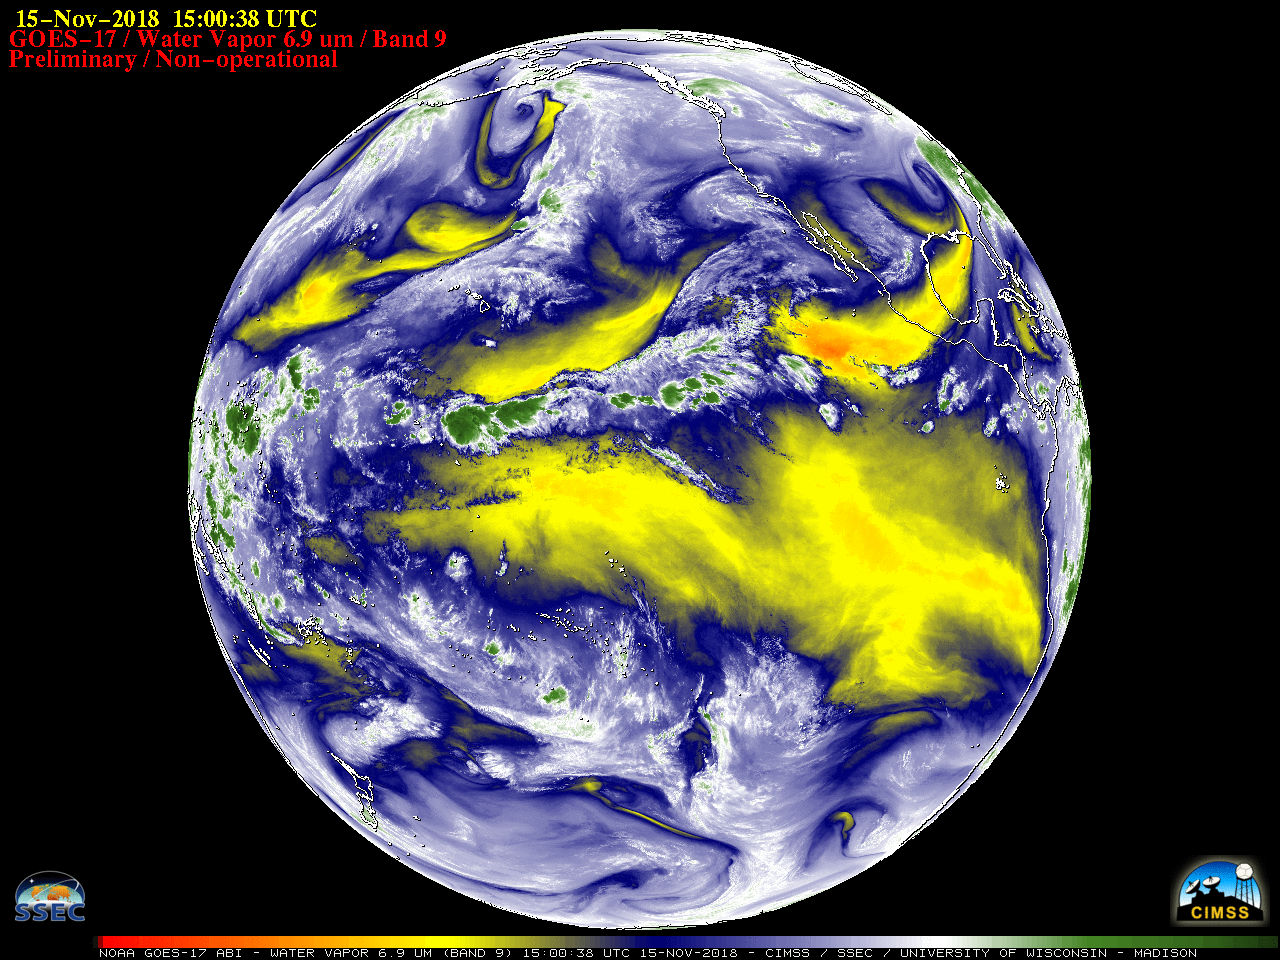 GOES-17 Low-level (7.3 µm), Mid-level (6.9 µm) and Upper-level (6.2 µm) Water Vapor images [click to play animation | MP4]